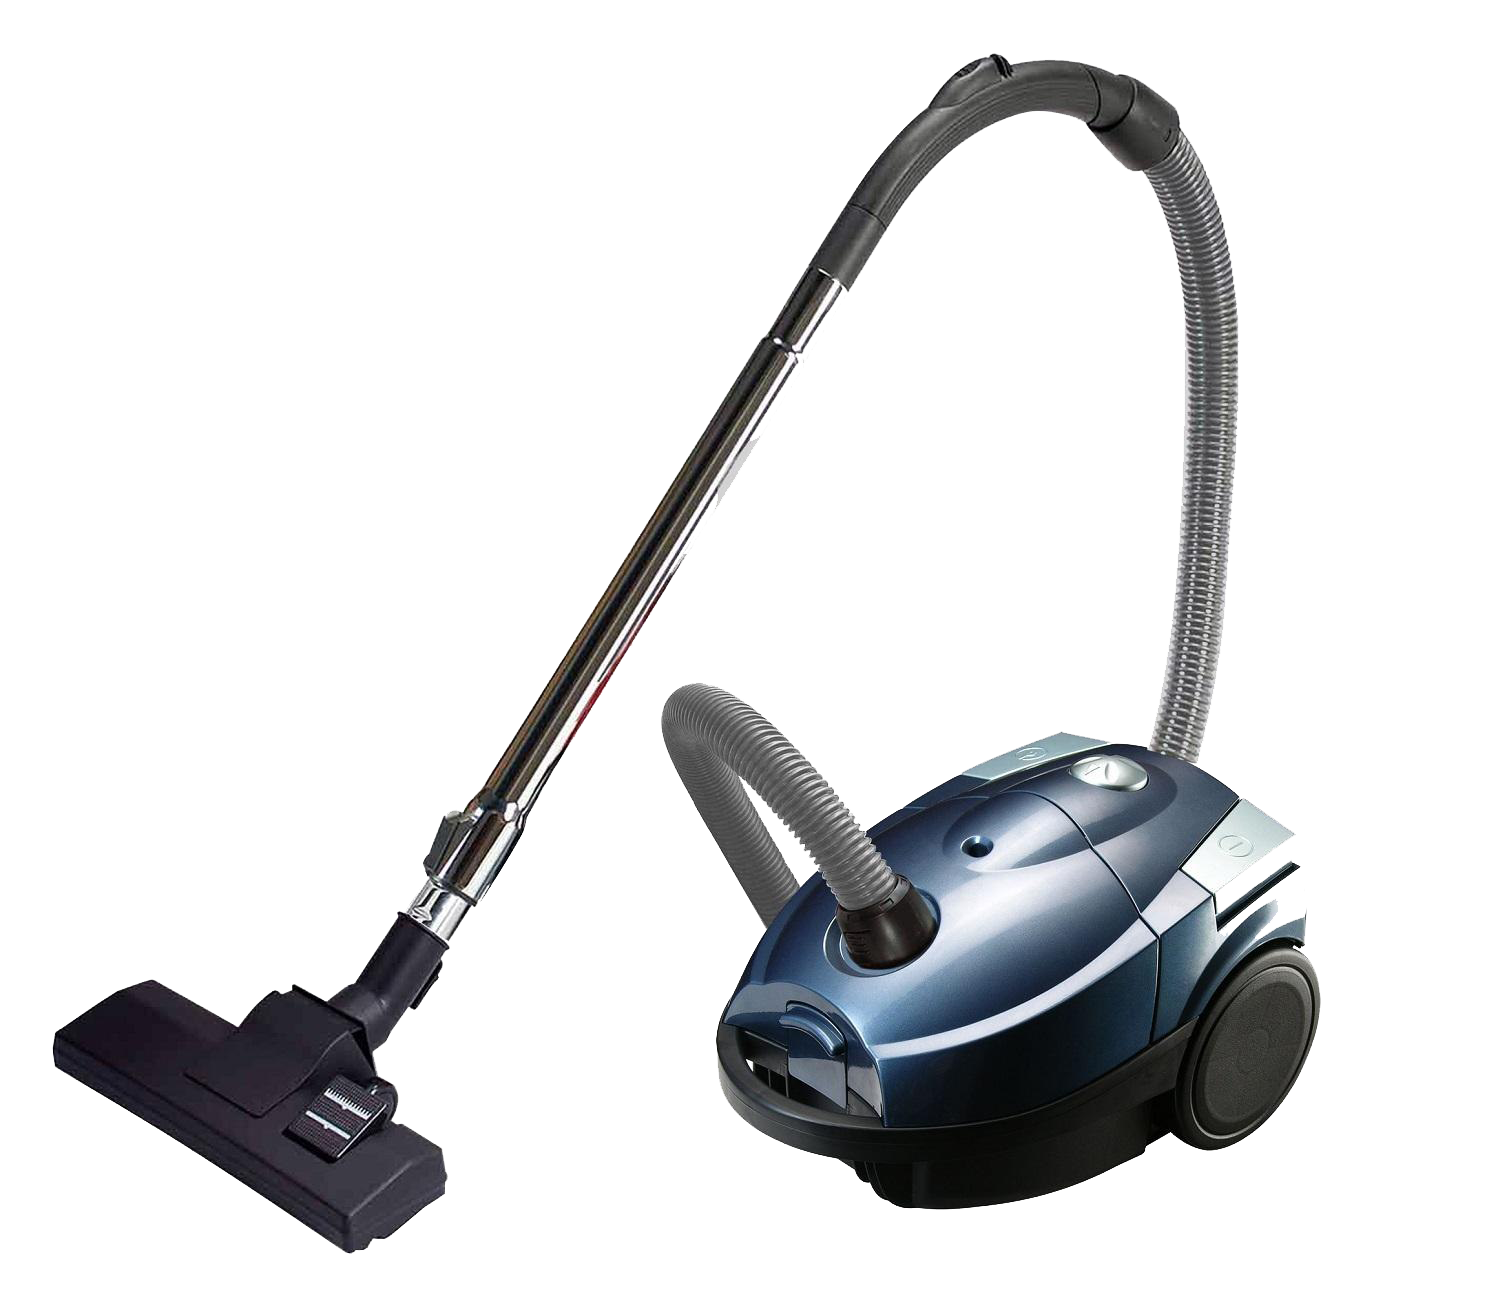 Home Vacuum Cleaner PNG